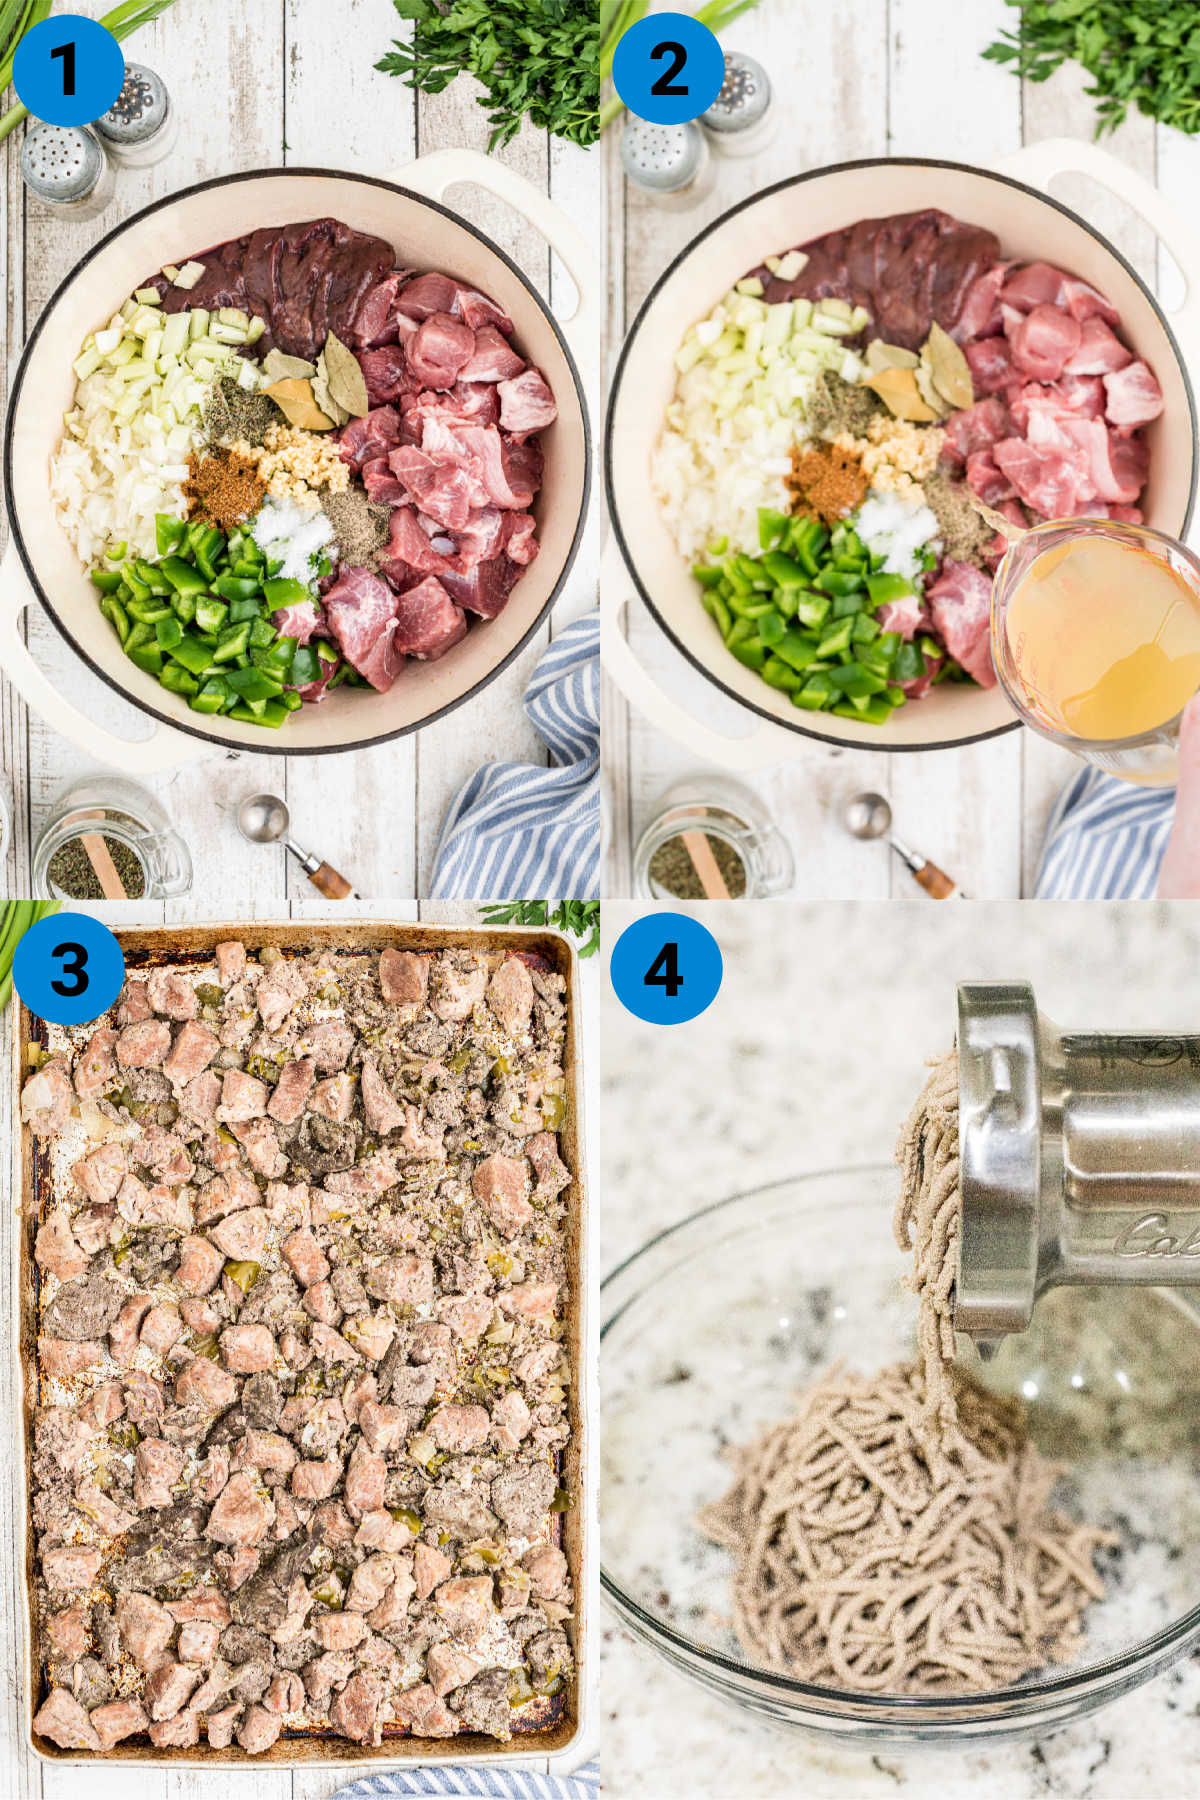 four images in a collage showing how to make homemade boudin sausage